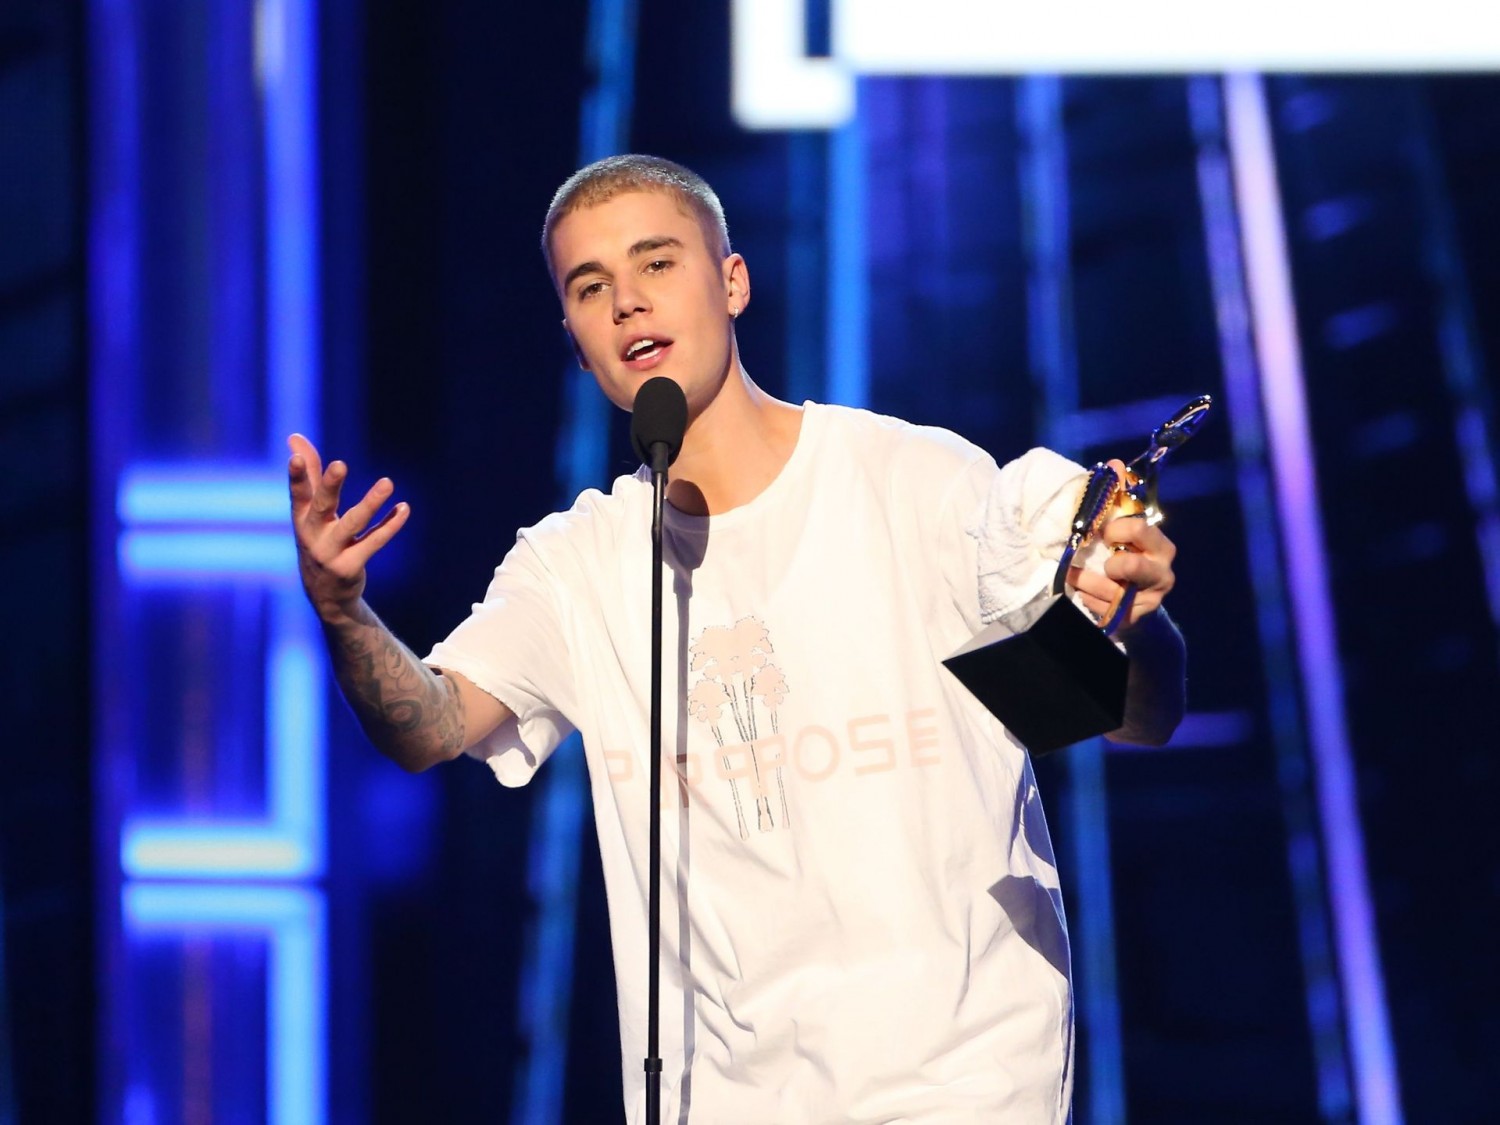 Justin Bieber thanked fans onstage while accepting a trophy during the 2016 Billboard Music Awards. JB Lacroix, WireImage